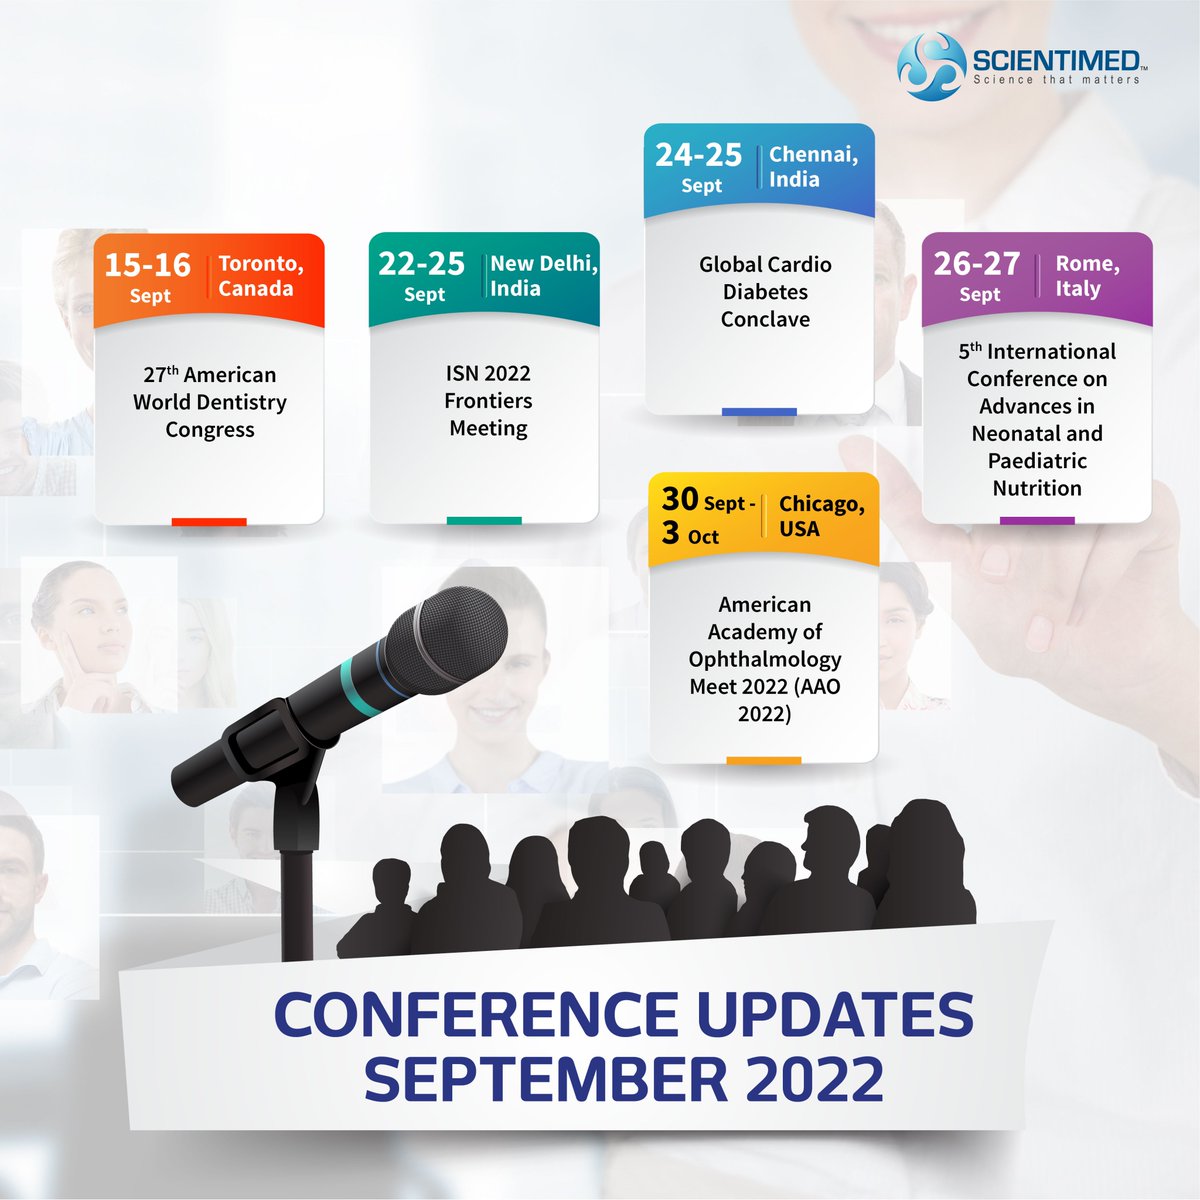 Conference updates for September 2022. 

Follow us for more updates and visit our website scientimed.com for details on our services.

#conference #conferenceupdates #conferencealerts #sept2022 #scientimed